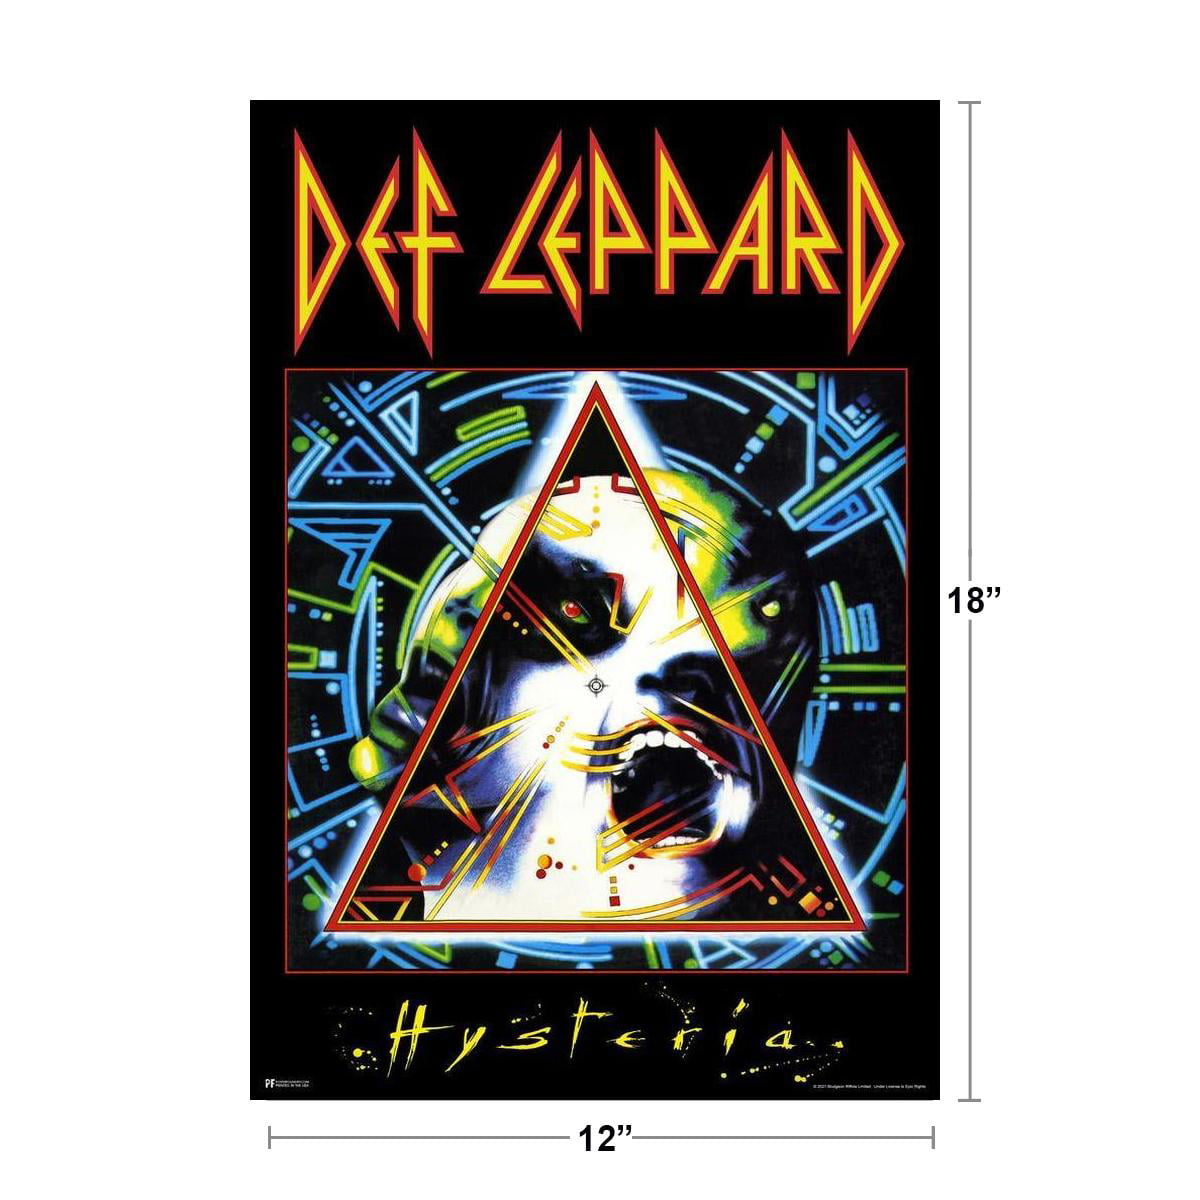 Def Leppard Pyromania Album Cover Heavy Metal Music Merchandise Retro Vintage 80s Aesthetic Band Laminated Dry Erase Wall Poster 12x18 